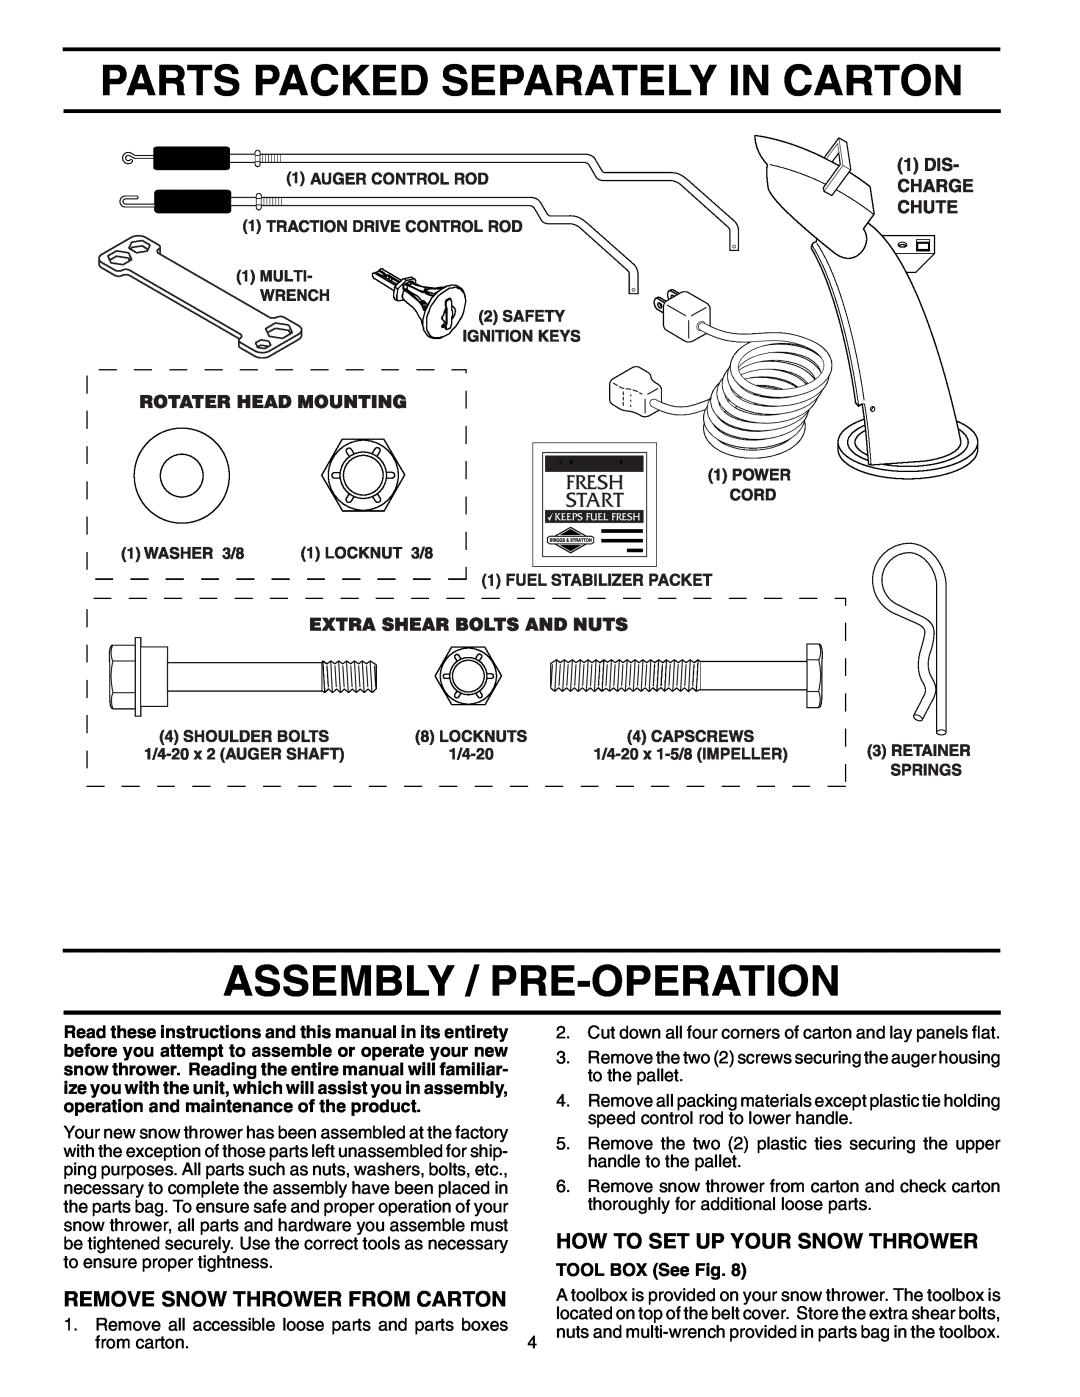 Husqvarna 5524SEB owner manual Parts Packed Separately In Carton Assembly / Pre-Operation, How To Set Up Your Snow Thrower 